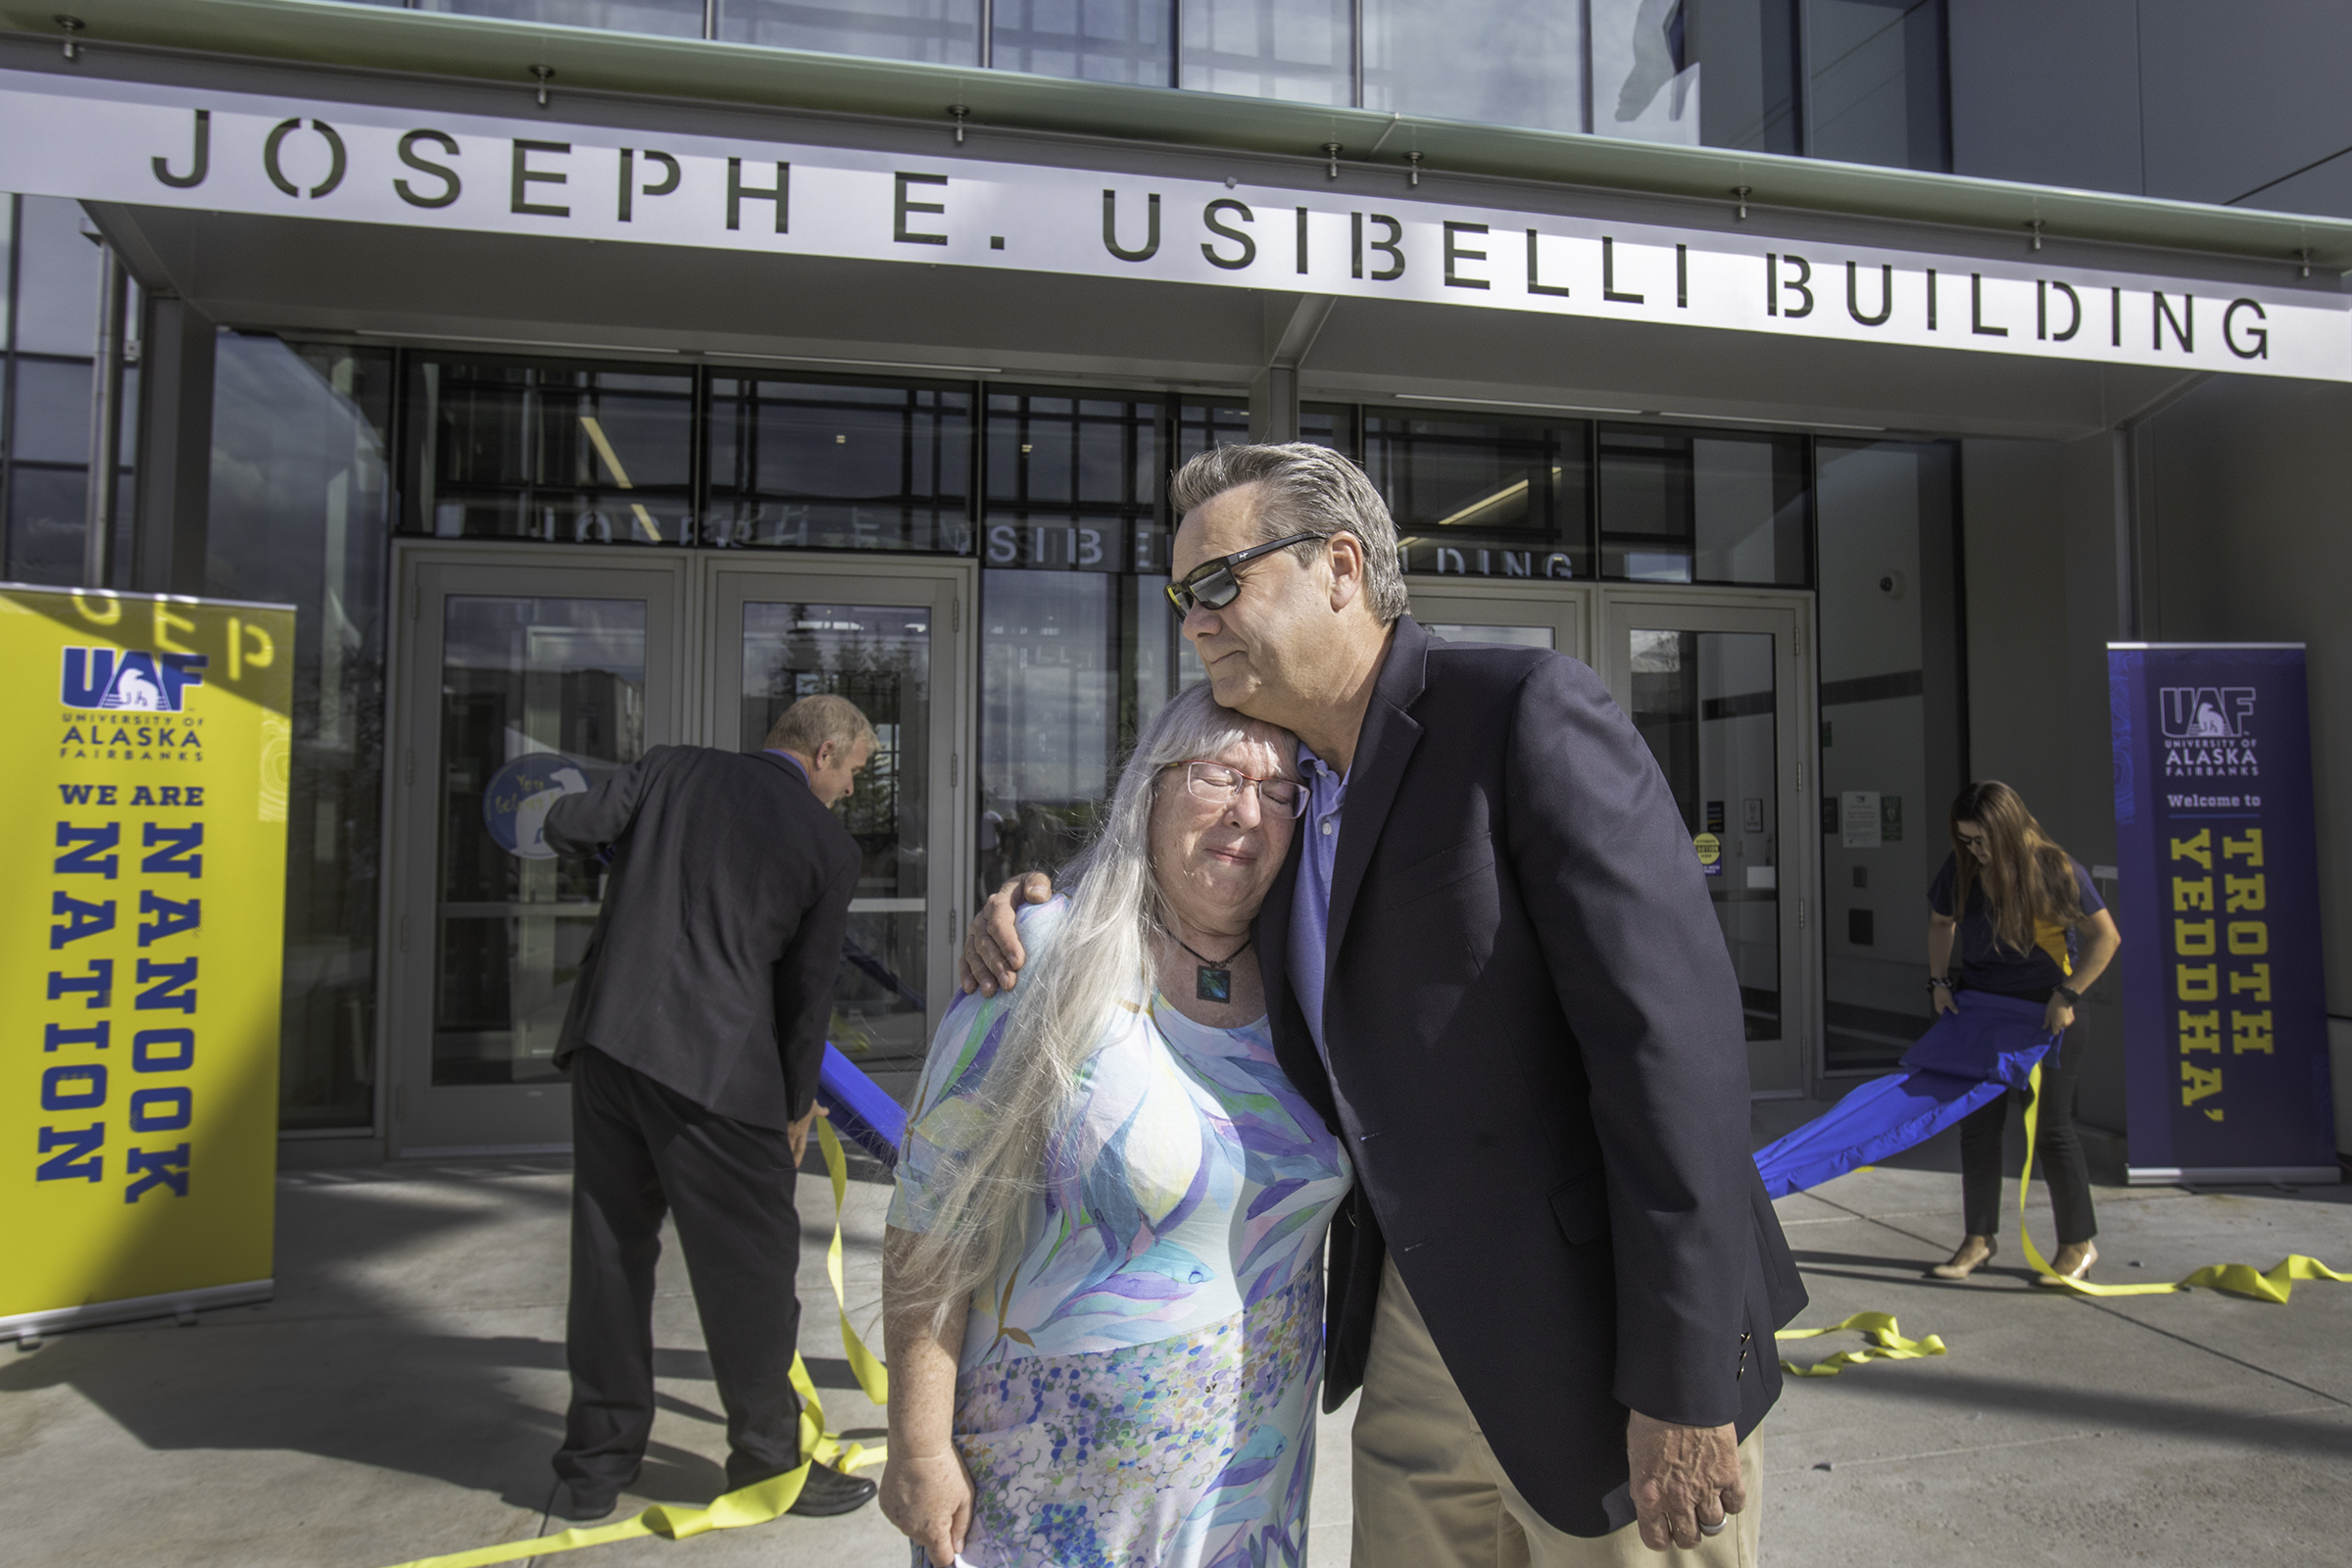 Peggy Shumaker, wife of the late Joe Usibelli, and Joe Usibelli Jr. share an emotional moment after unveiling. UAF photo by Eric Engman.